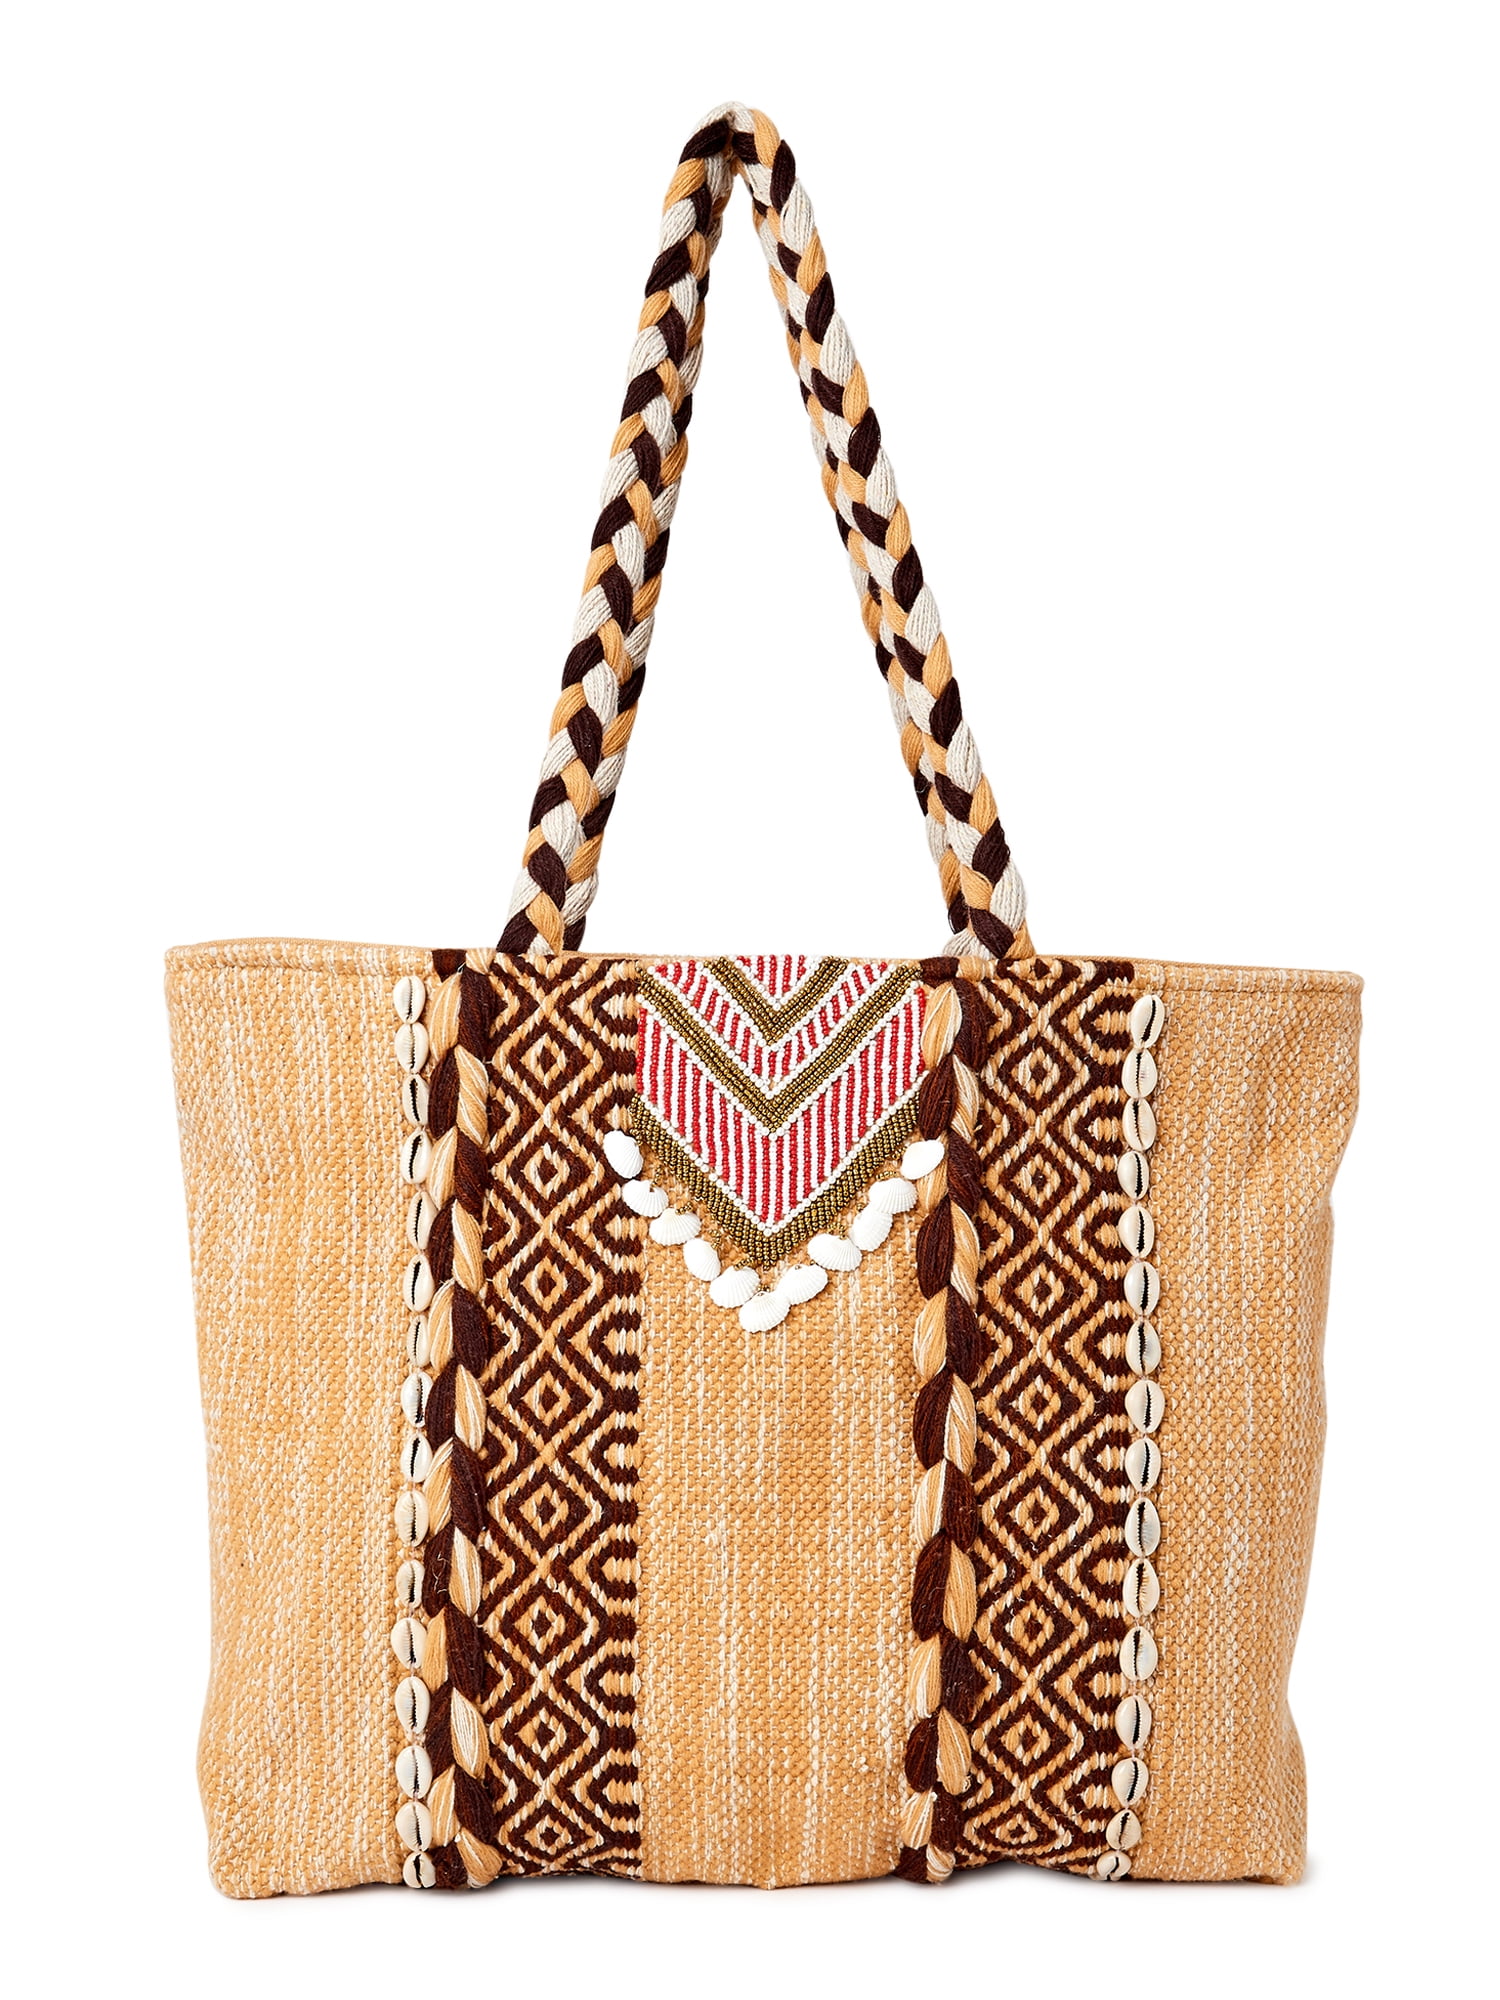 Twig & Arrow Women's Woven Tote Beach Bag with Braided Shoulder Straps ...